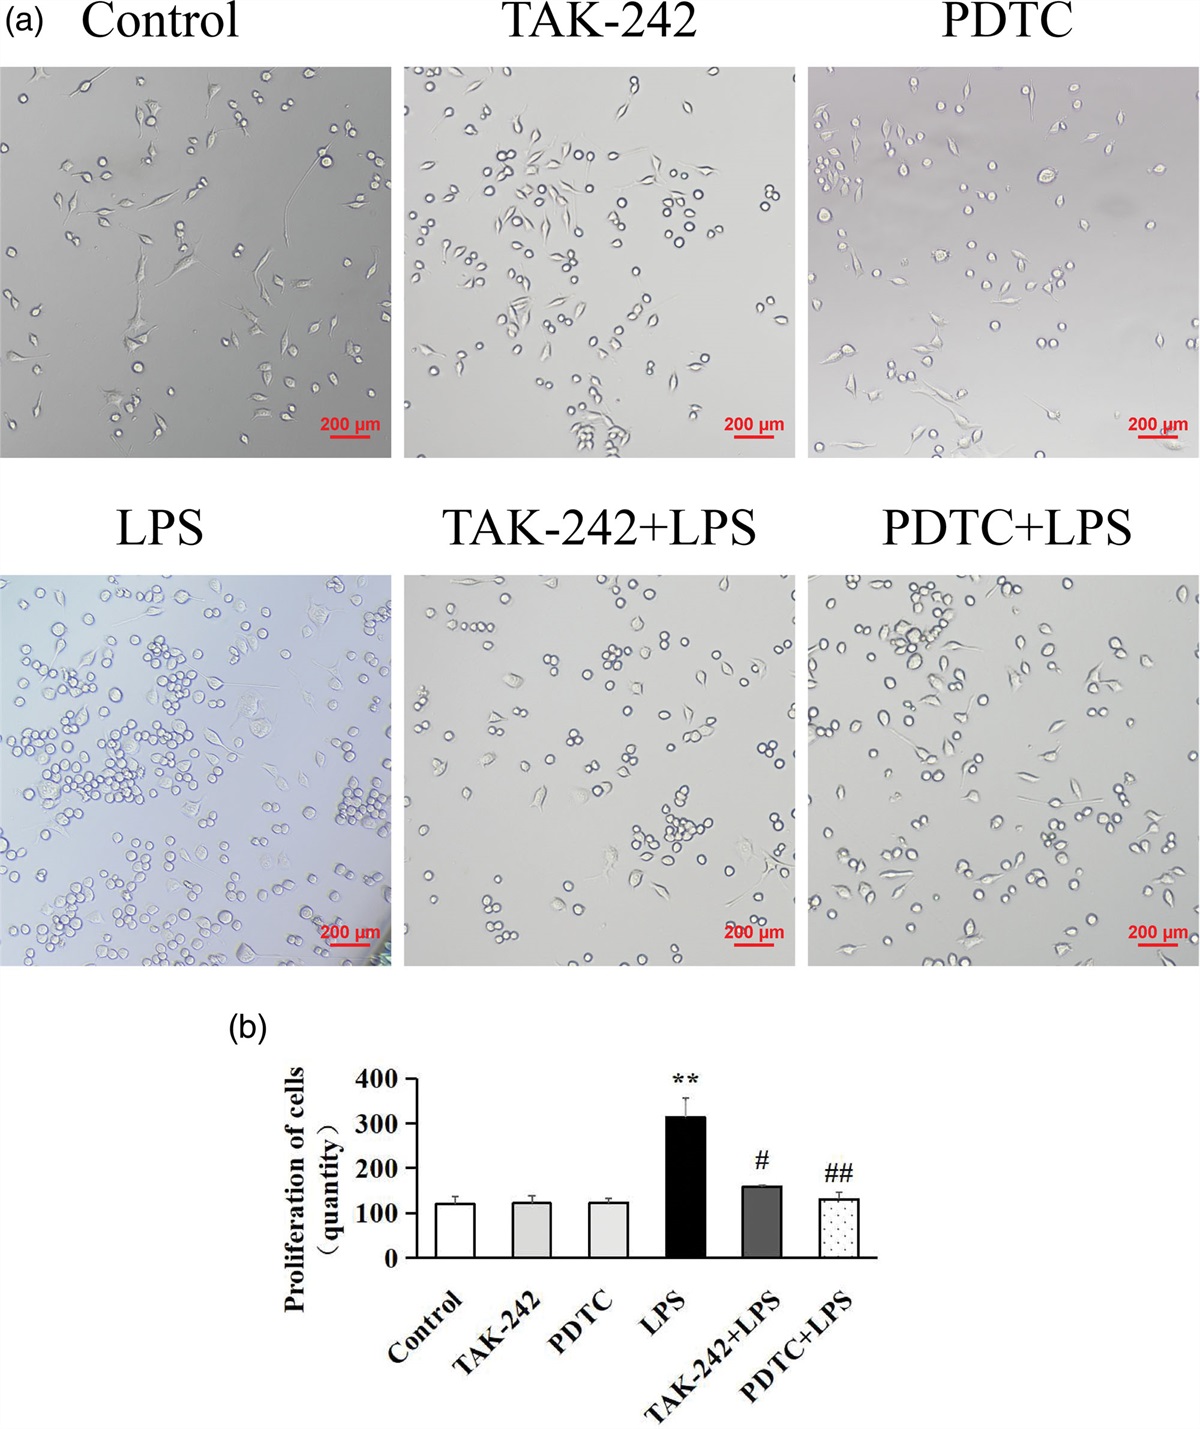 Inhibition of the TLR4/NF-κB pathway promotes the polarization of LPS-induced BV2 microglia toward the M2 phenotype